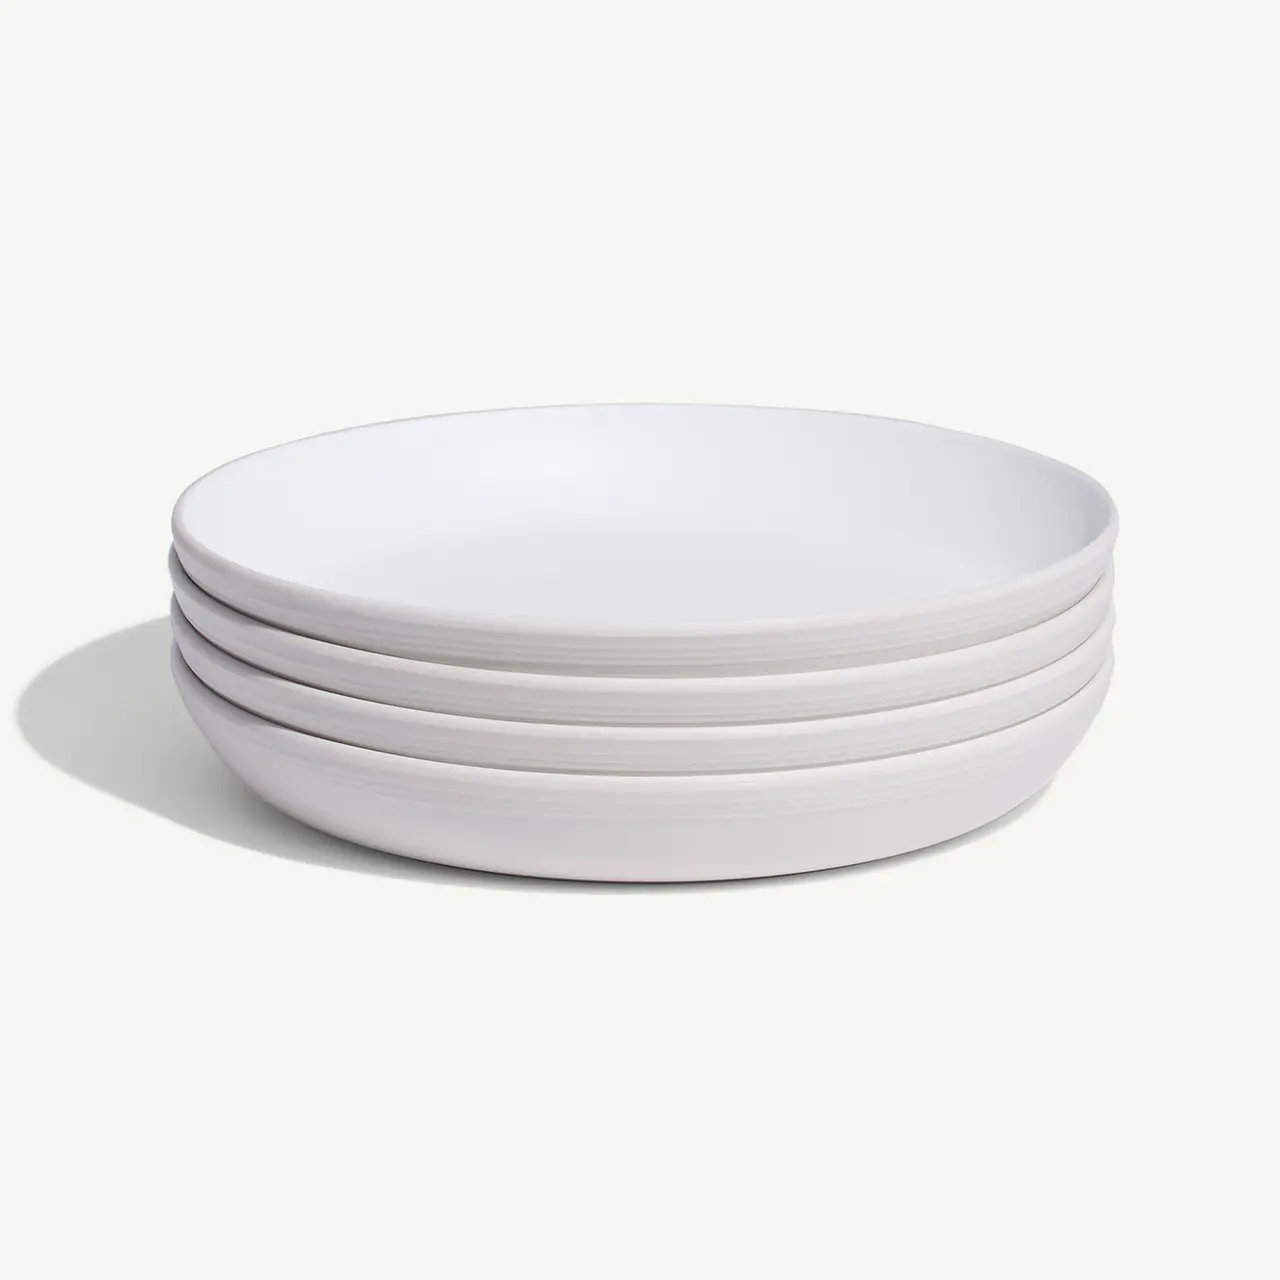 A stack of five simple white plates is displayed against a plain background.